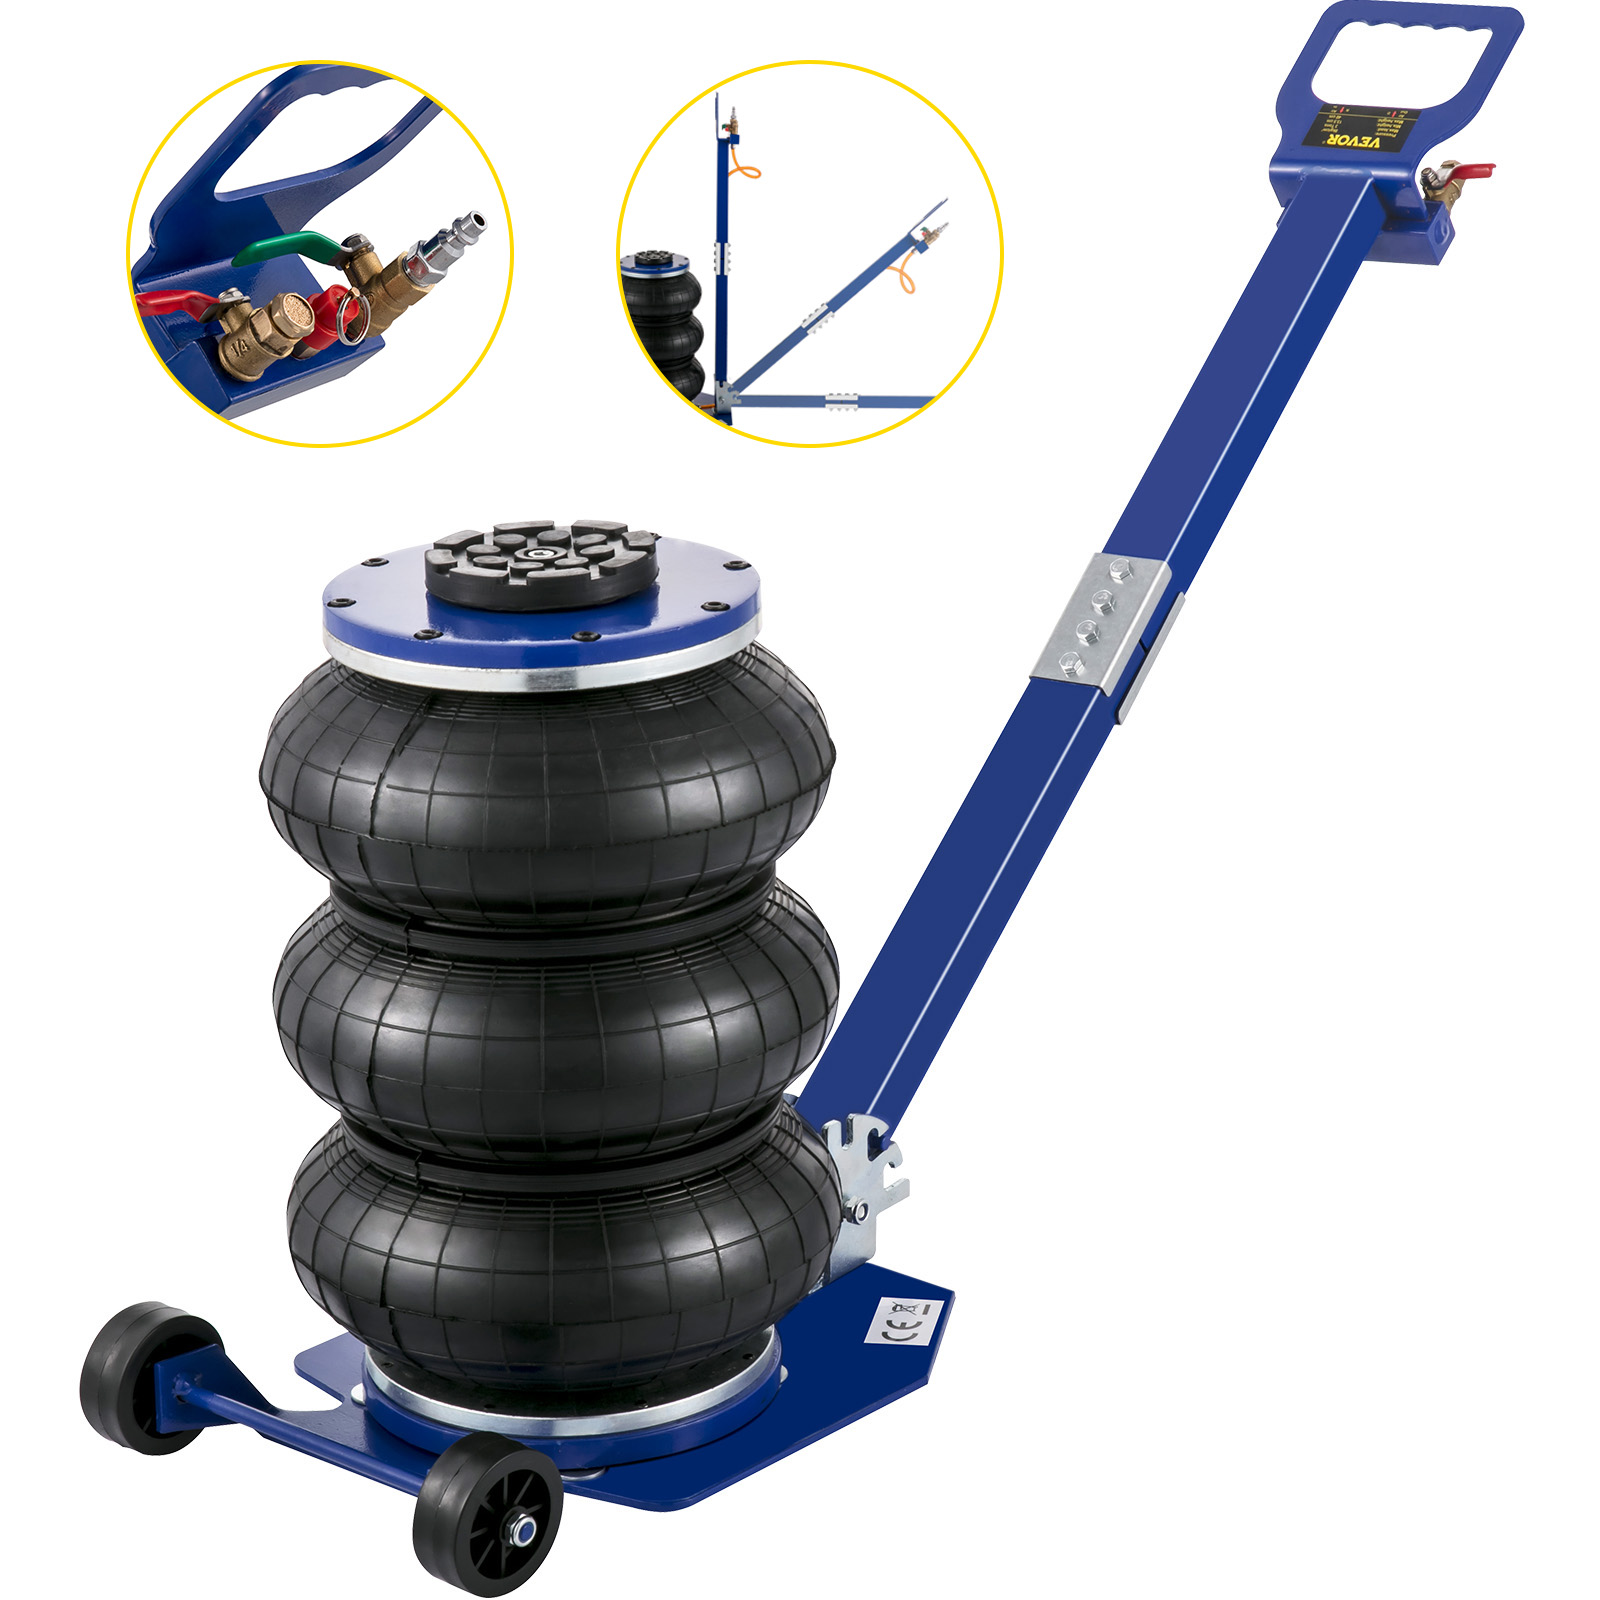 FlowerW 3000Kg 6600lbs Capacity Vehicle Air Operated Pneumatic Triple Bag Air Jack Lift 5.3-16.5 Inch Fast Lifting 